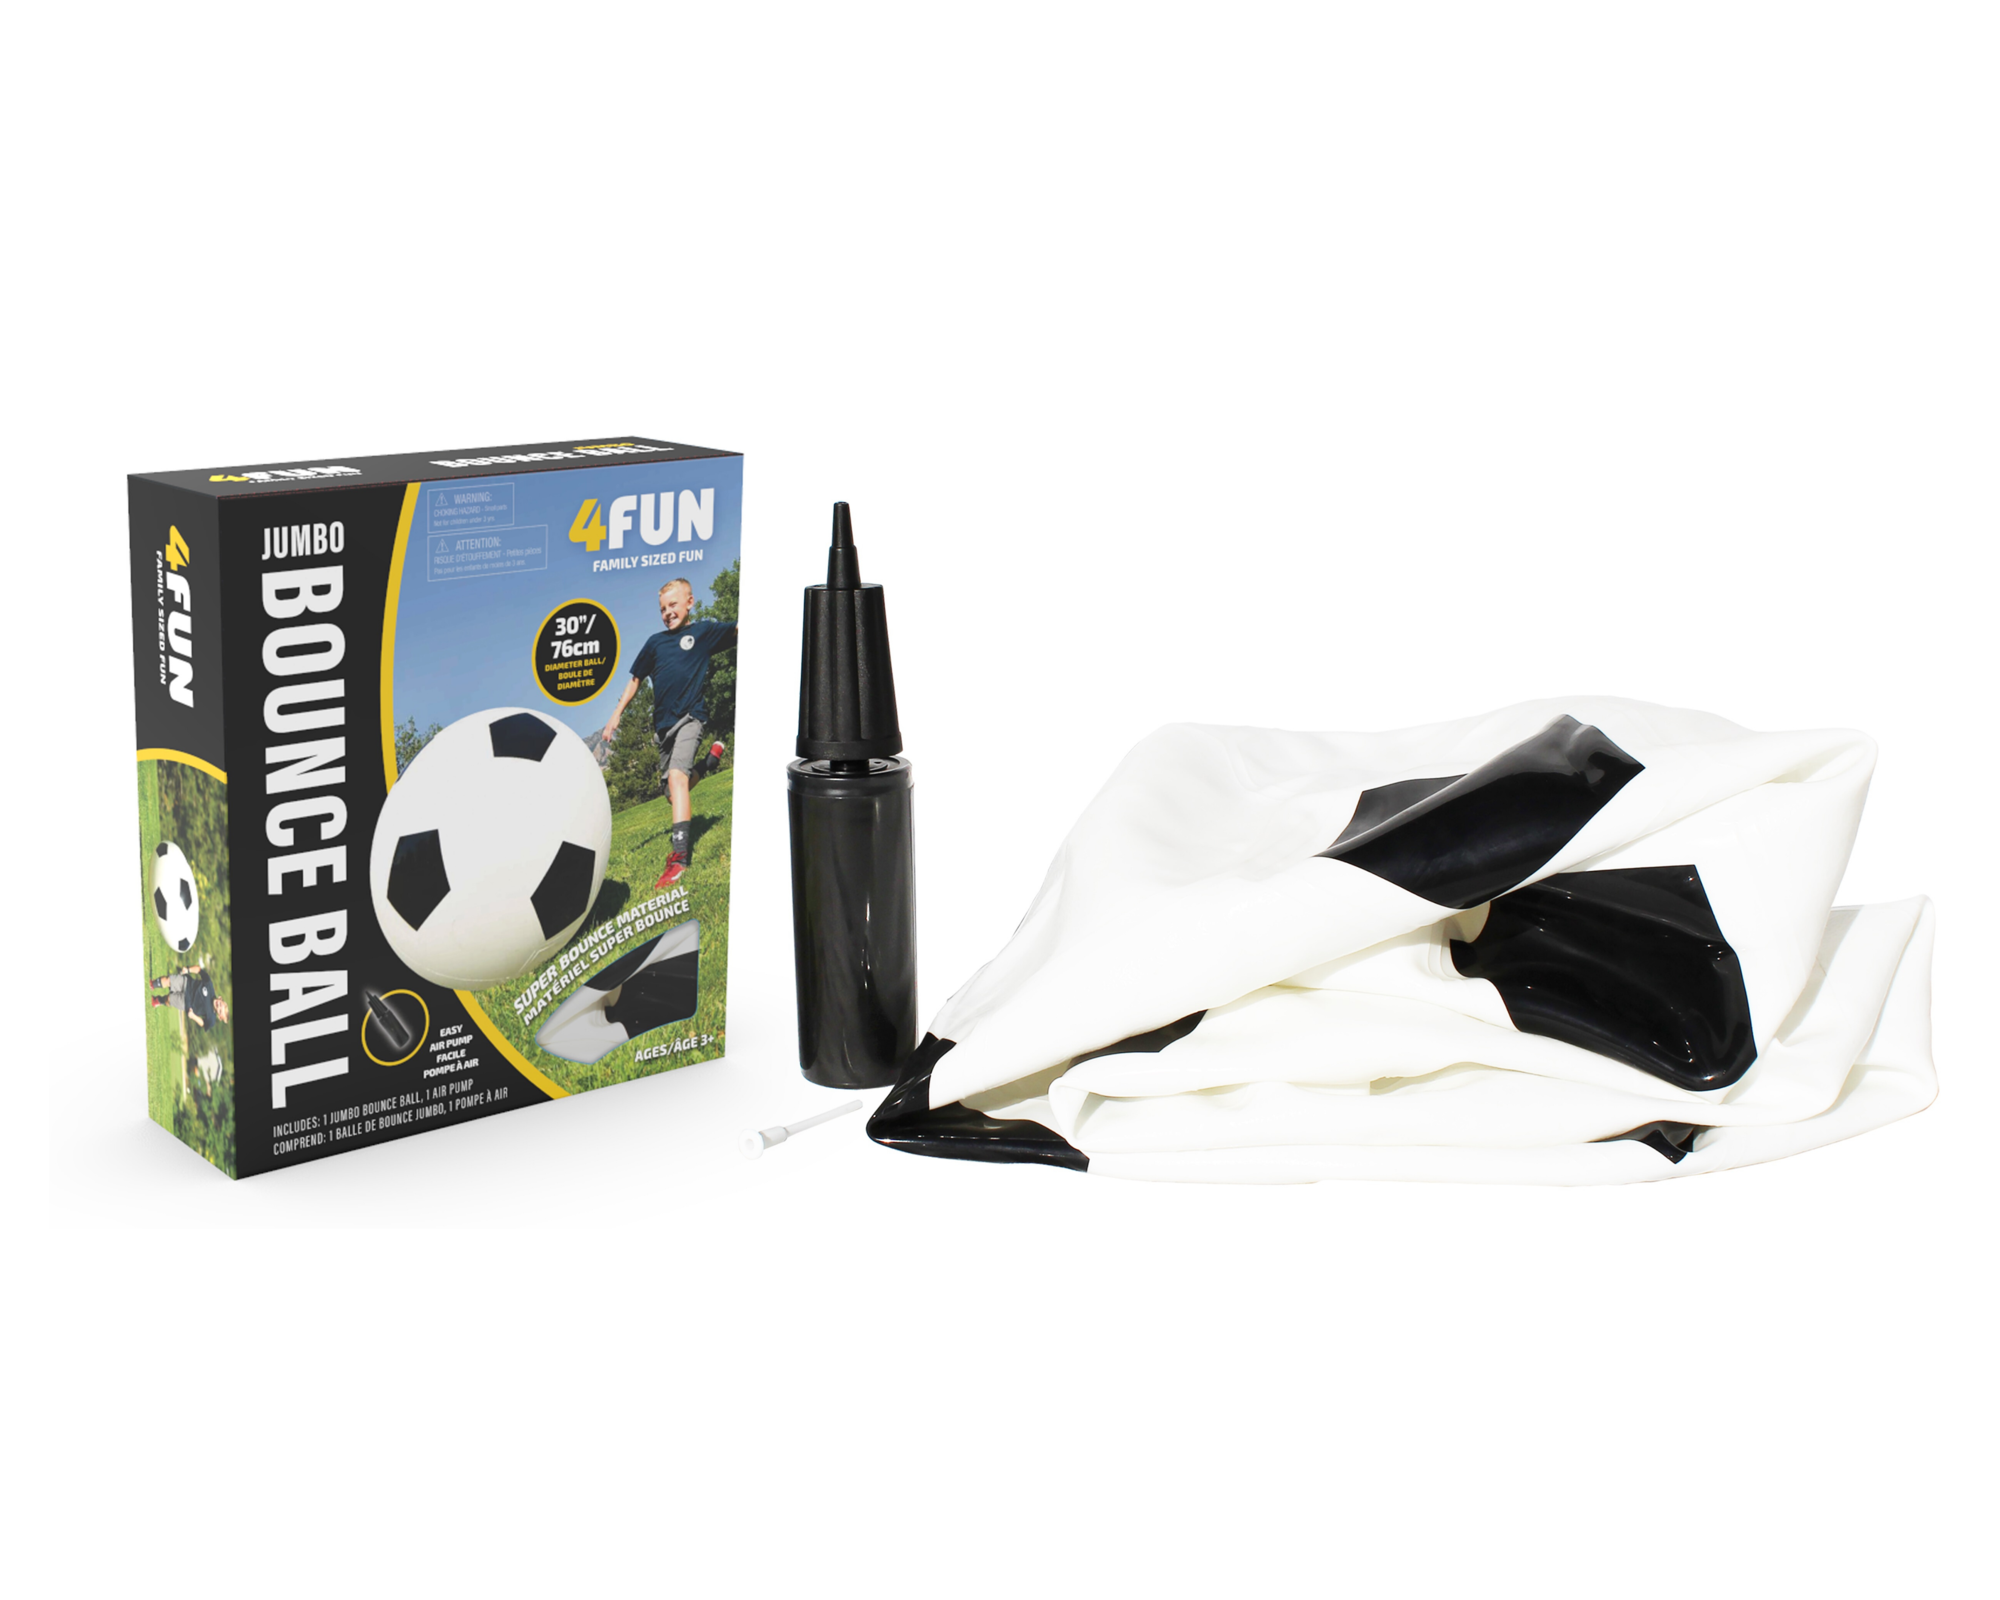 B4 Jumbo Bounce Ball  White/Black Great For Outdoor Play 76cm Diameter Approx. 